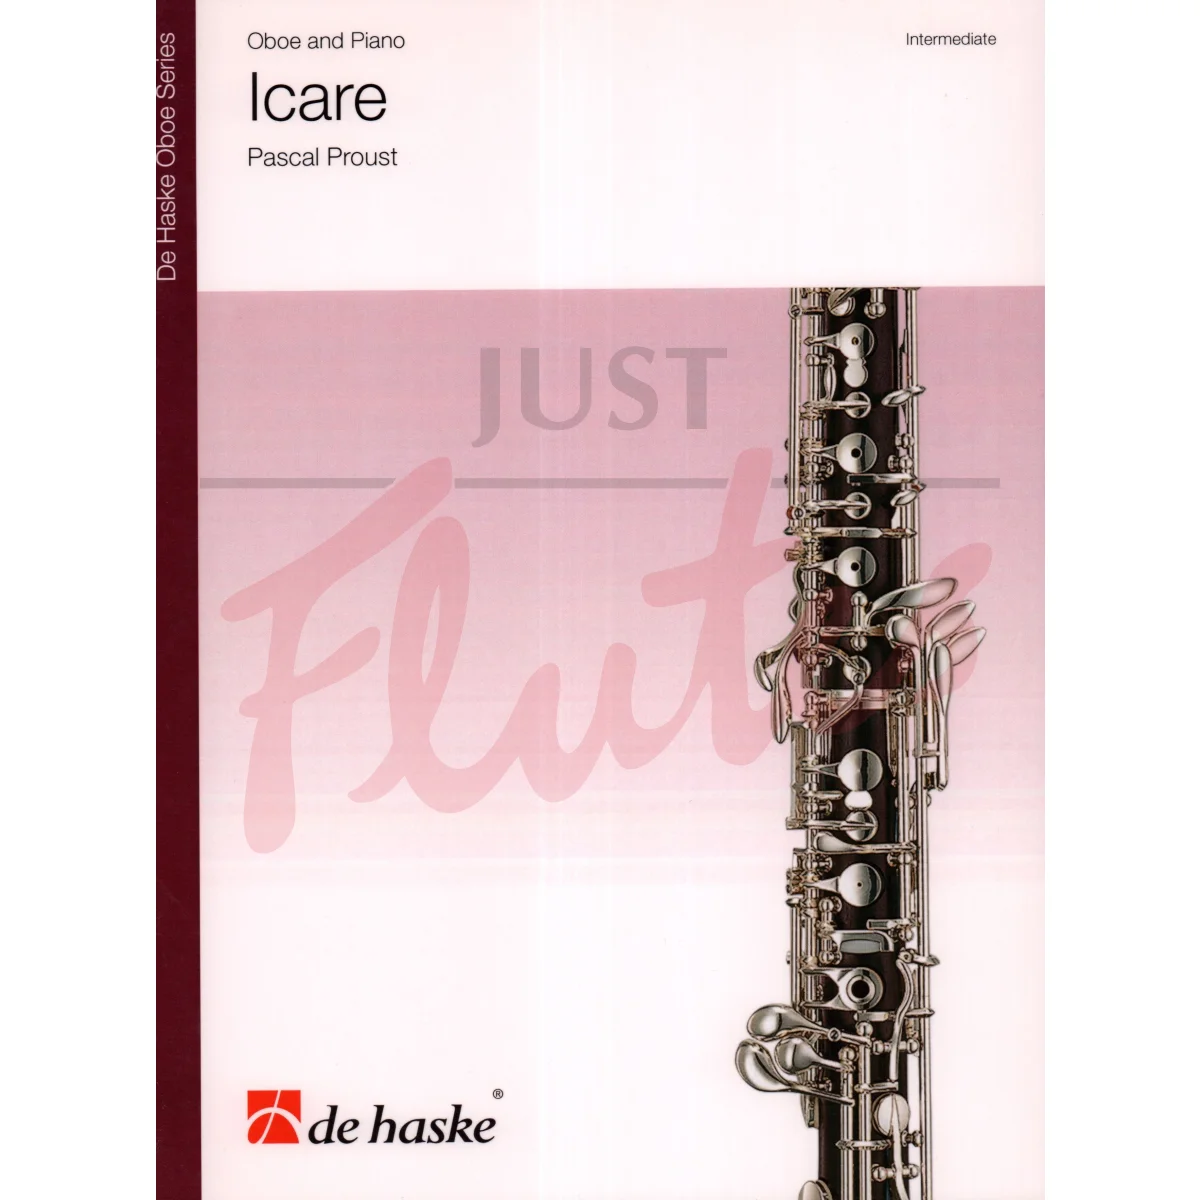 Icare for Oboe and Piano